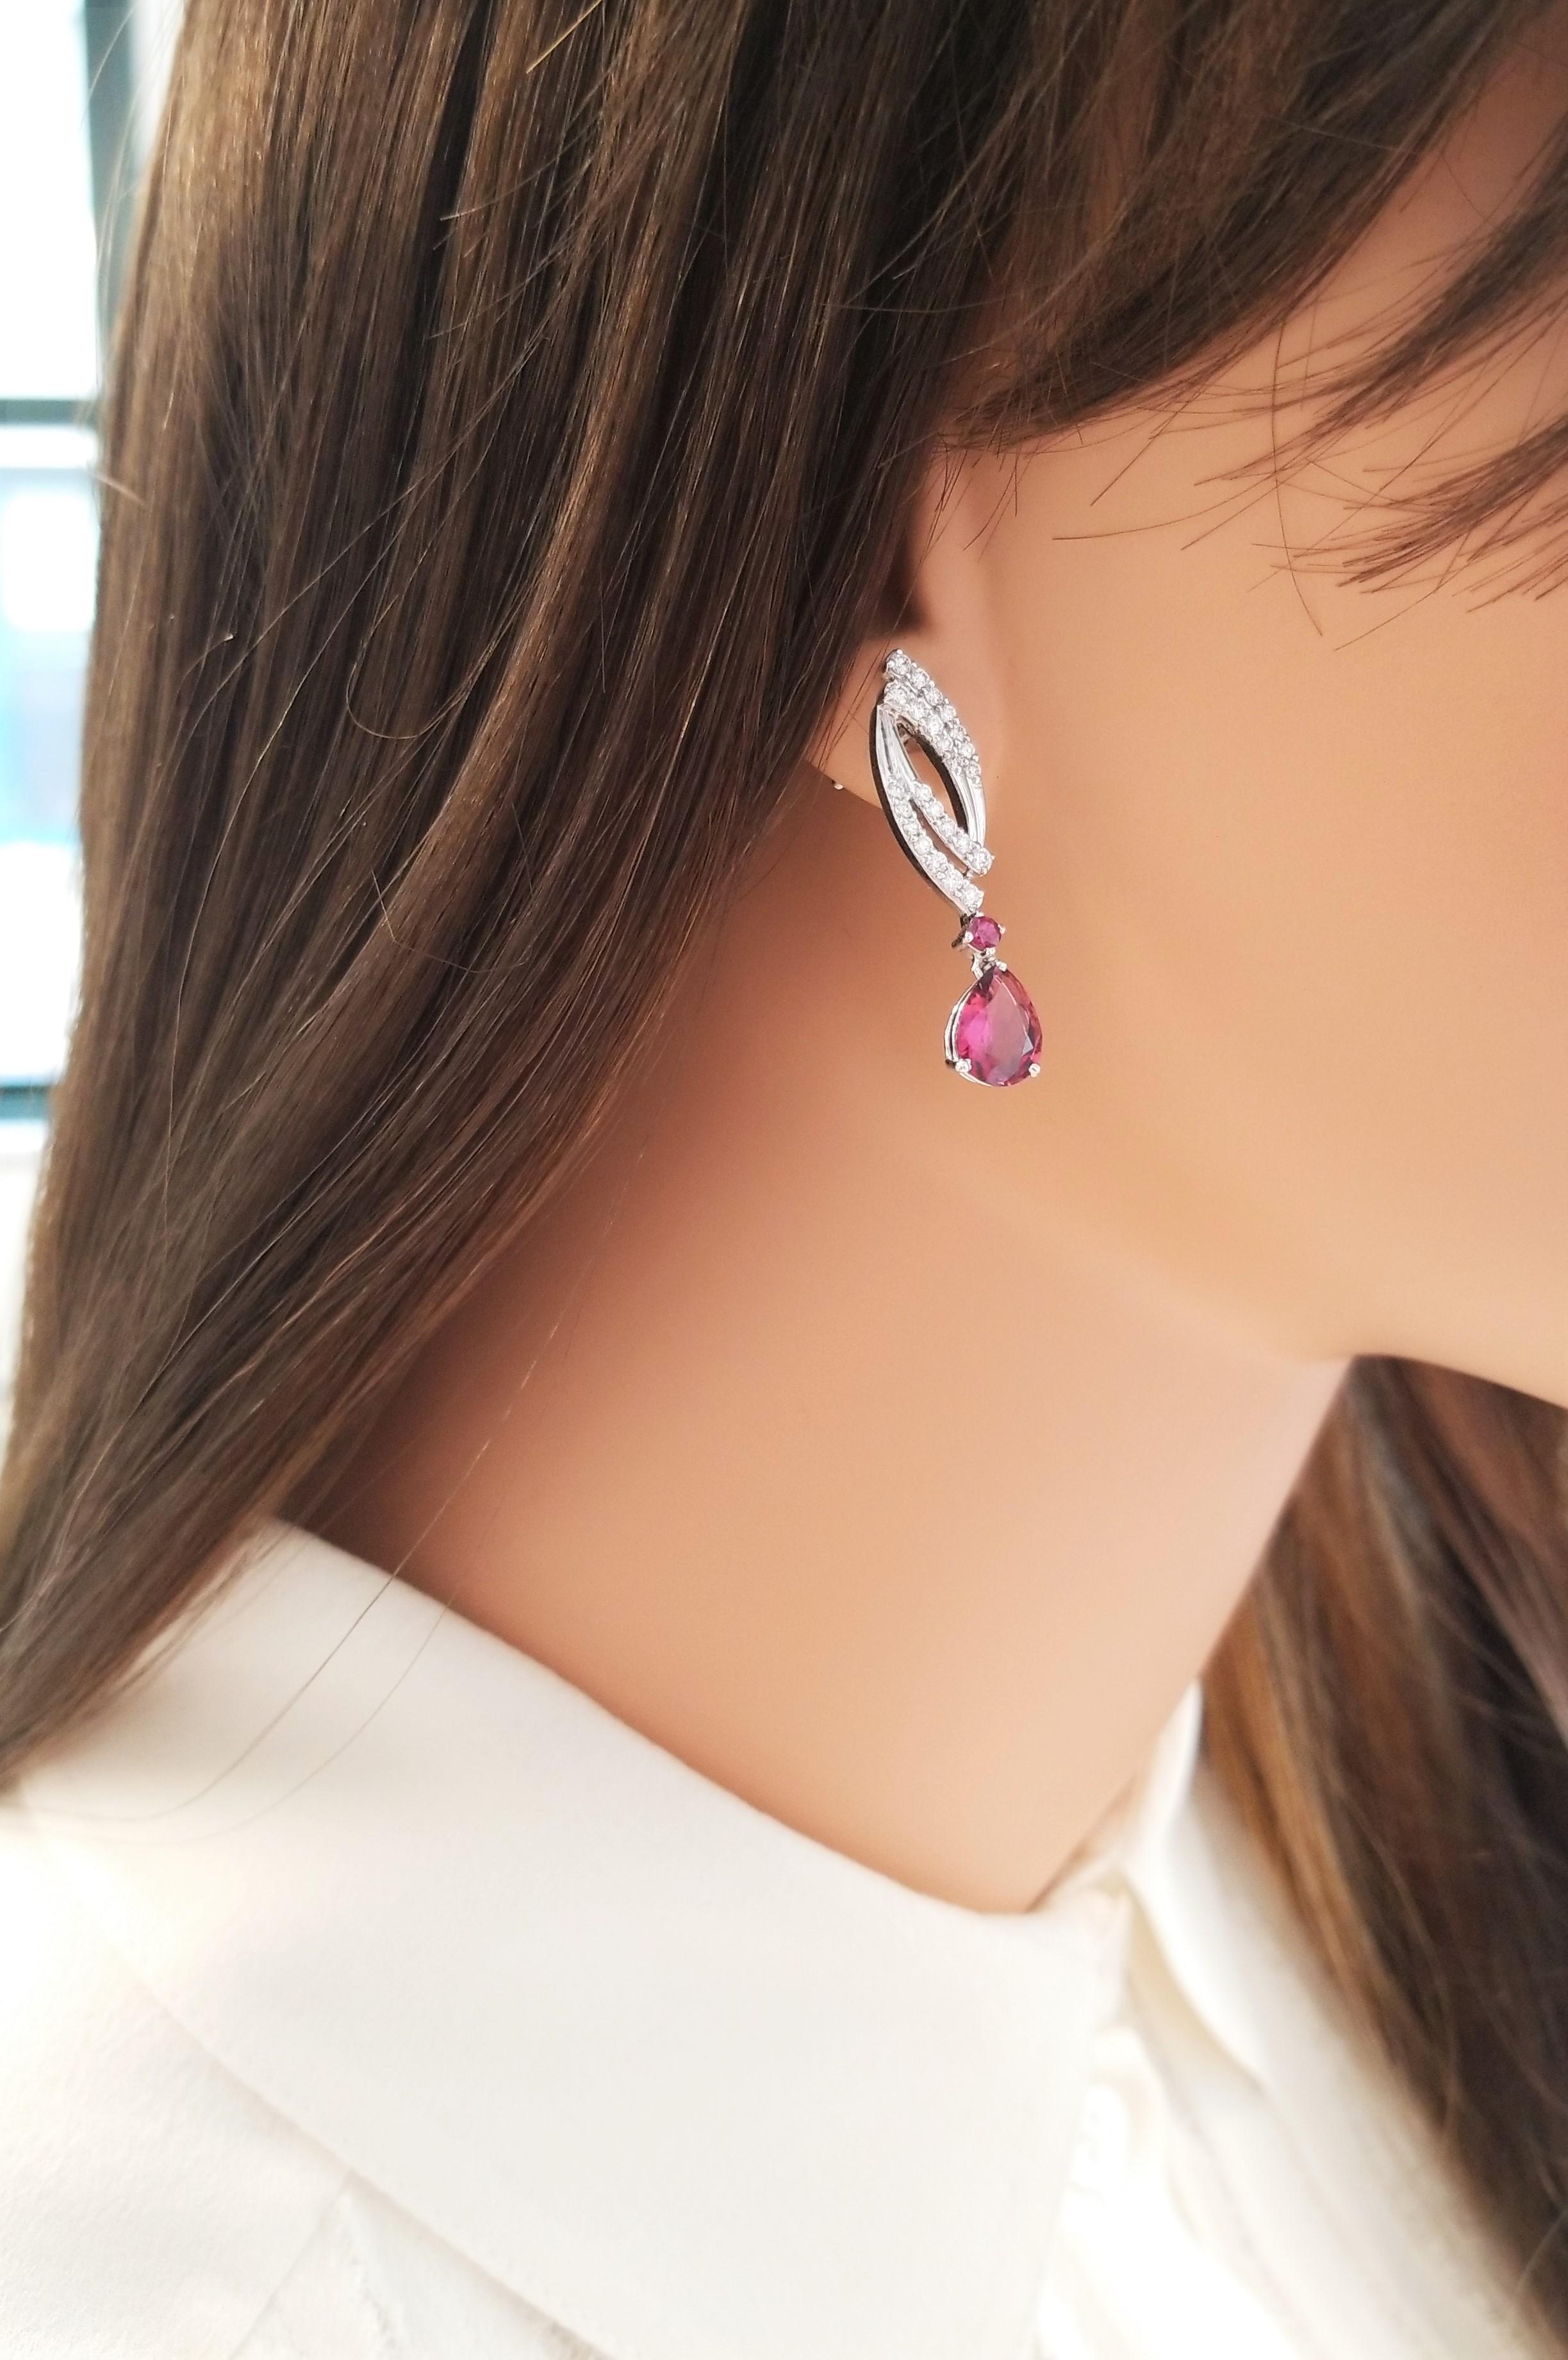 These dynamic dynasty style earrings feature a sweeping design that showcases 4 vibrant raspberry rubellite tourmalines, prong set, totaling 3.00 carats. The gem source is Brazil; their color hue is vivid purplish-red; clarity, luster, and